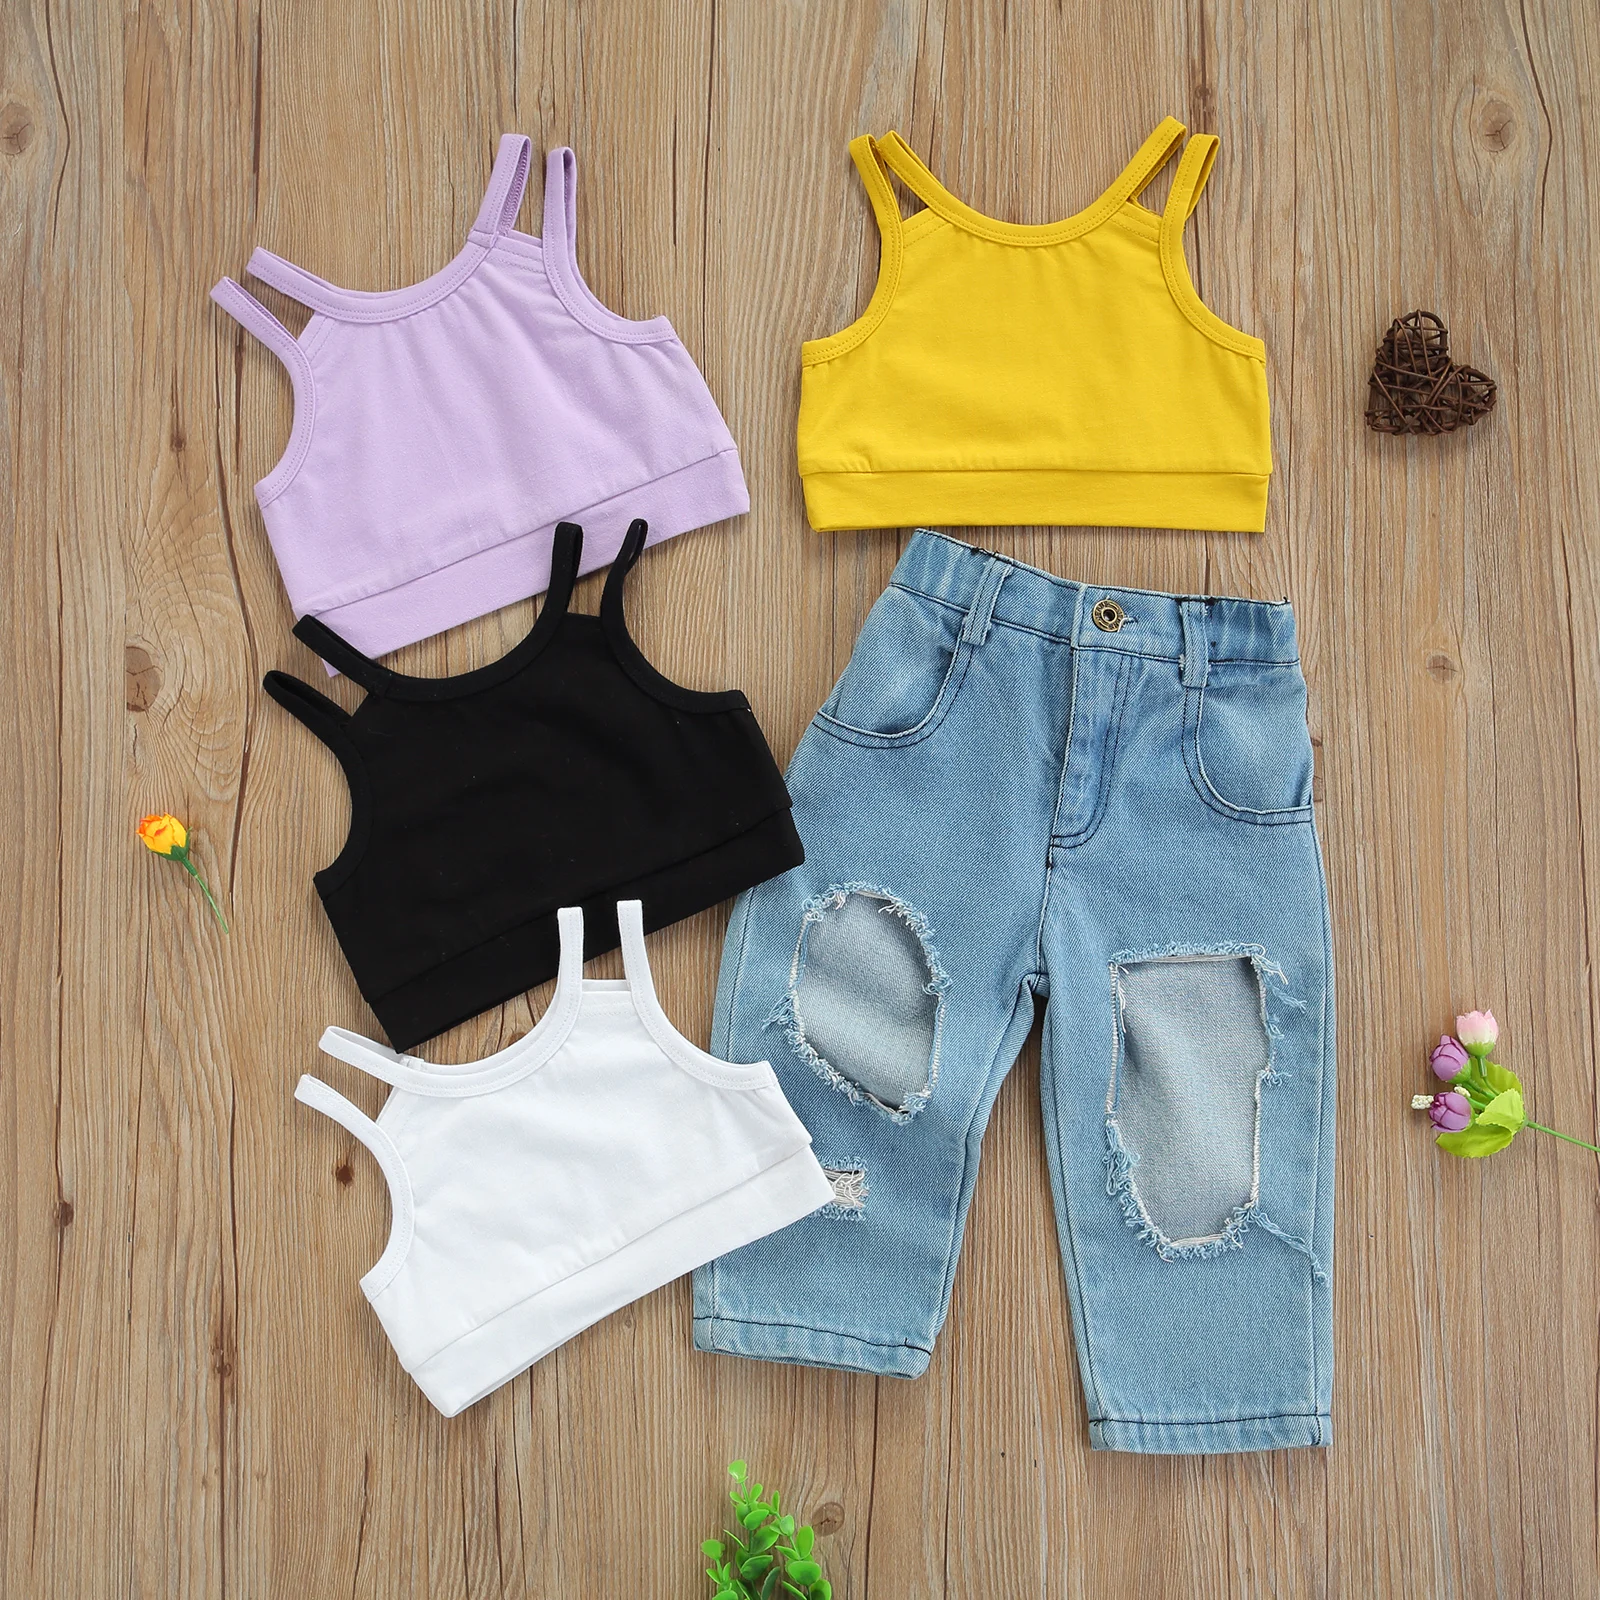 Cropped Camisoles For Women Solid Color Sleeveless Girls Short